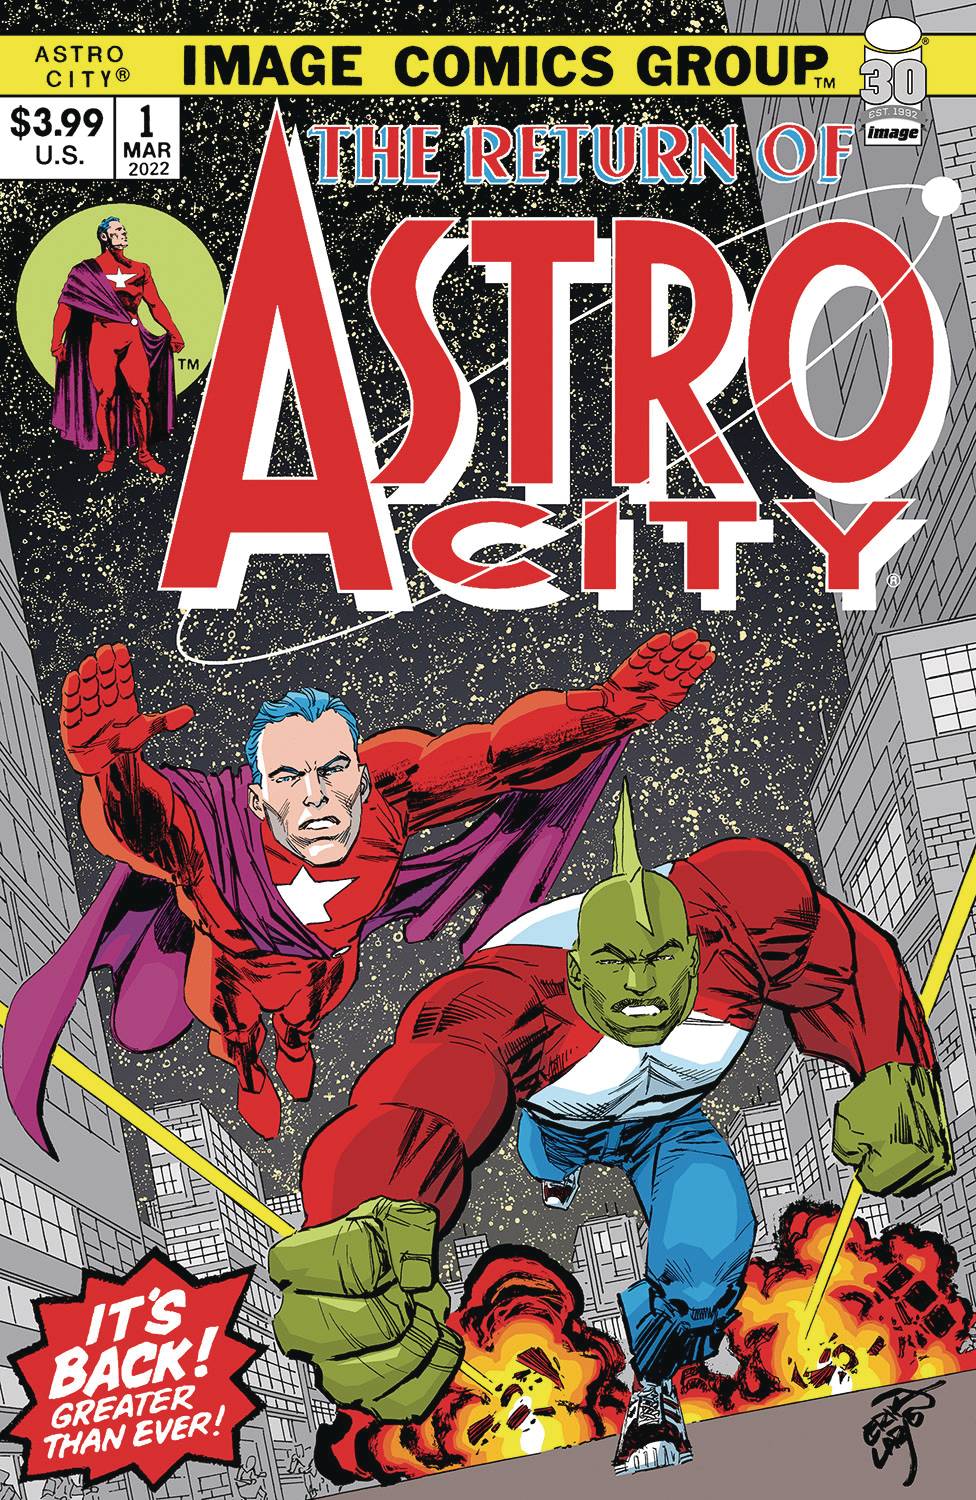 Astro City That Was Then Special #1 (Cover B - Larsen)